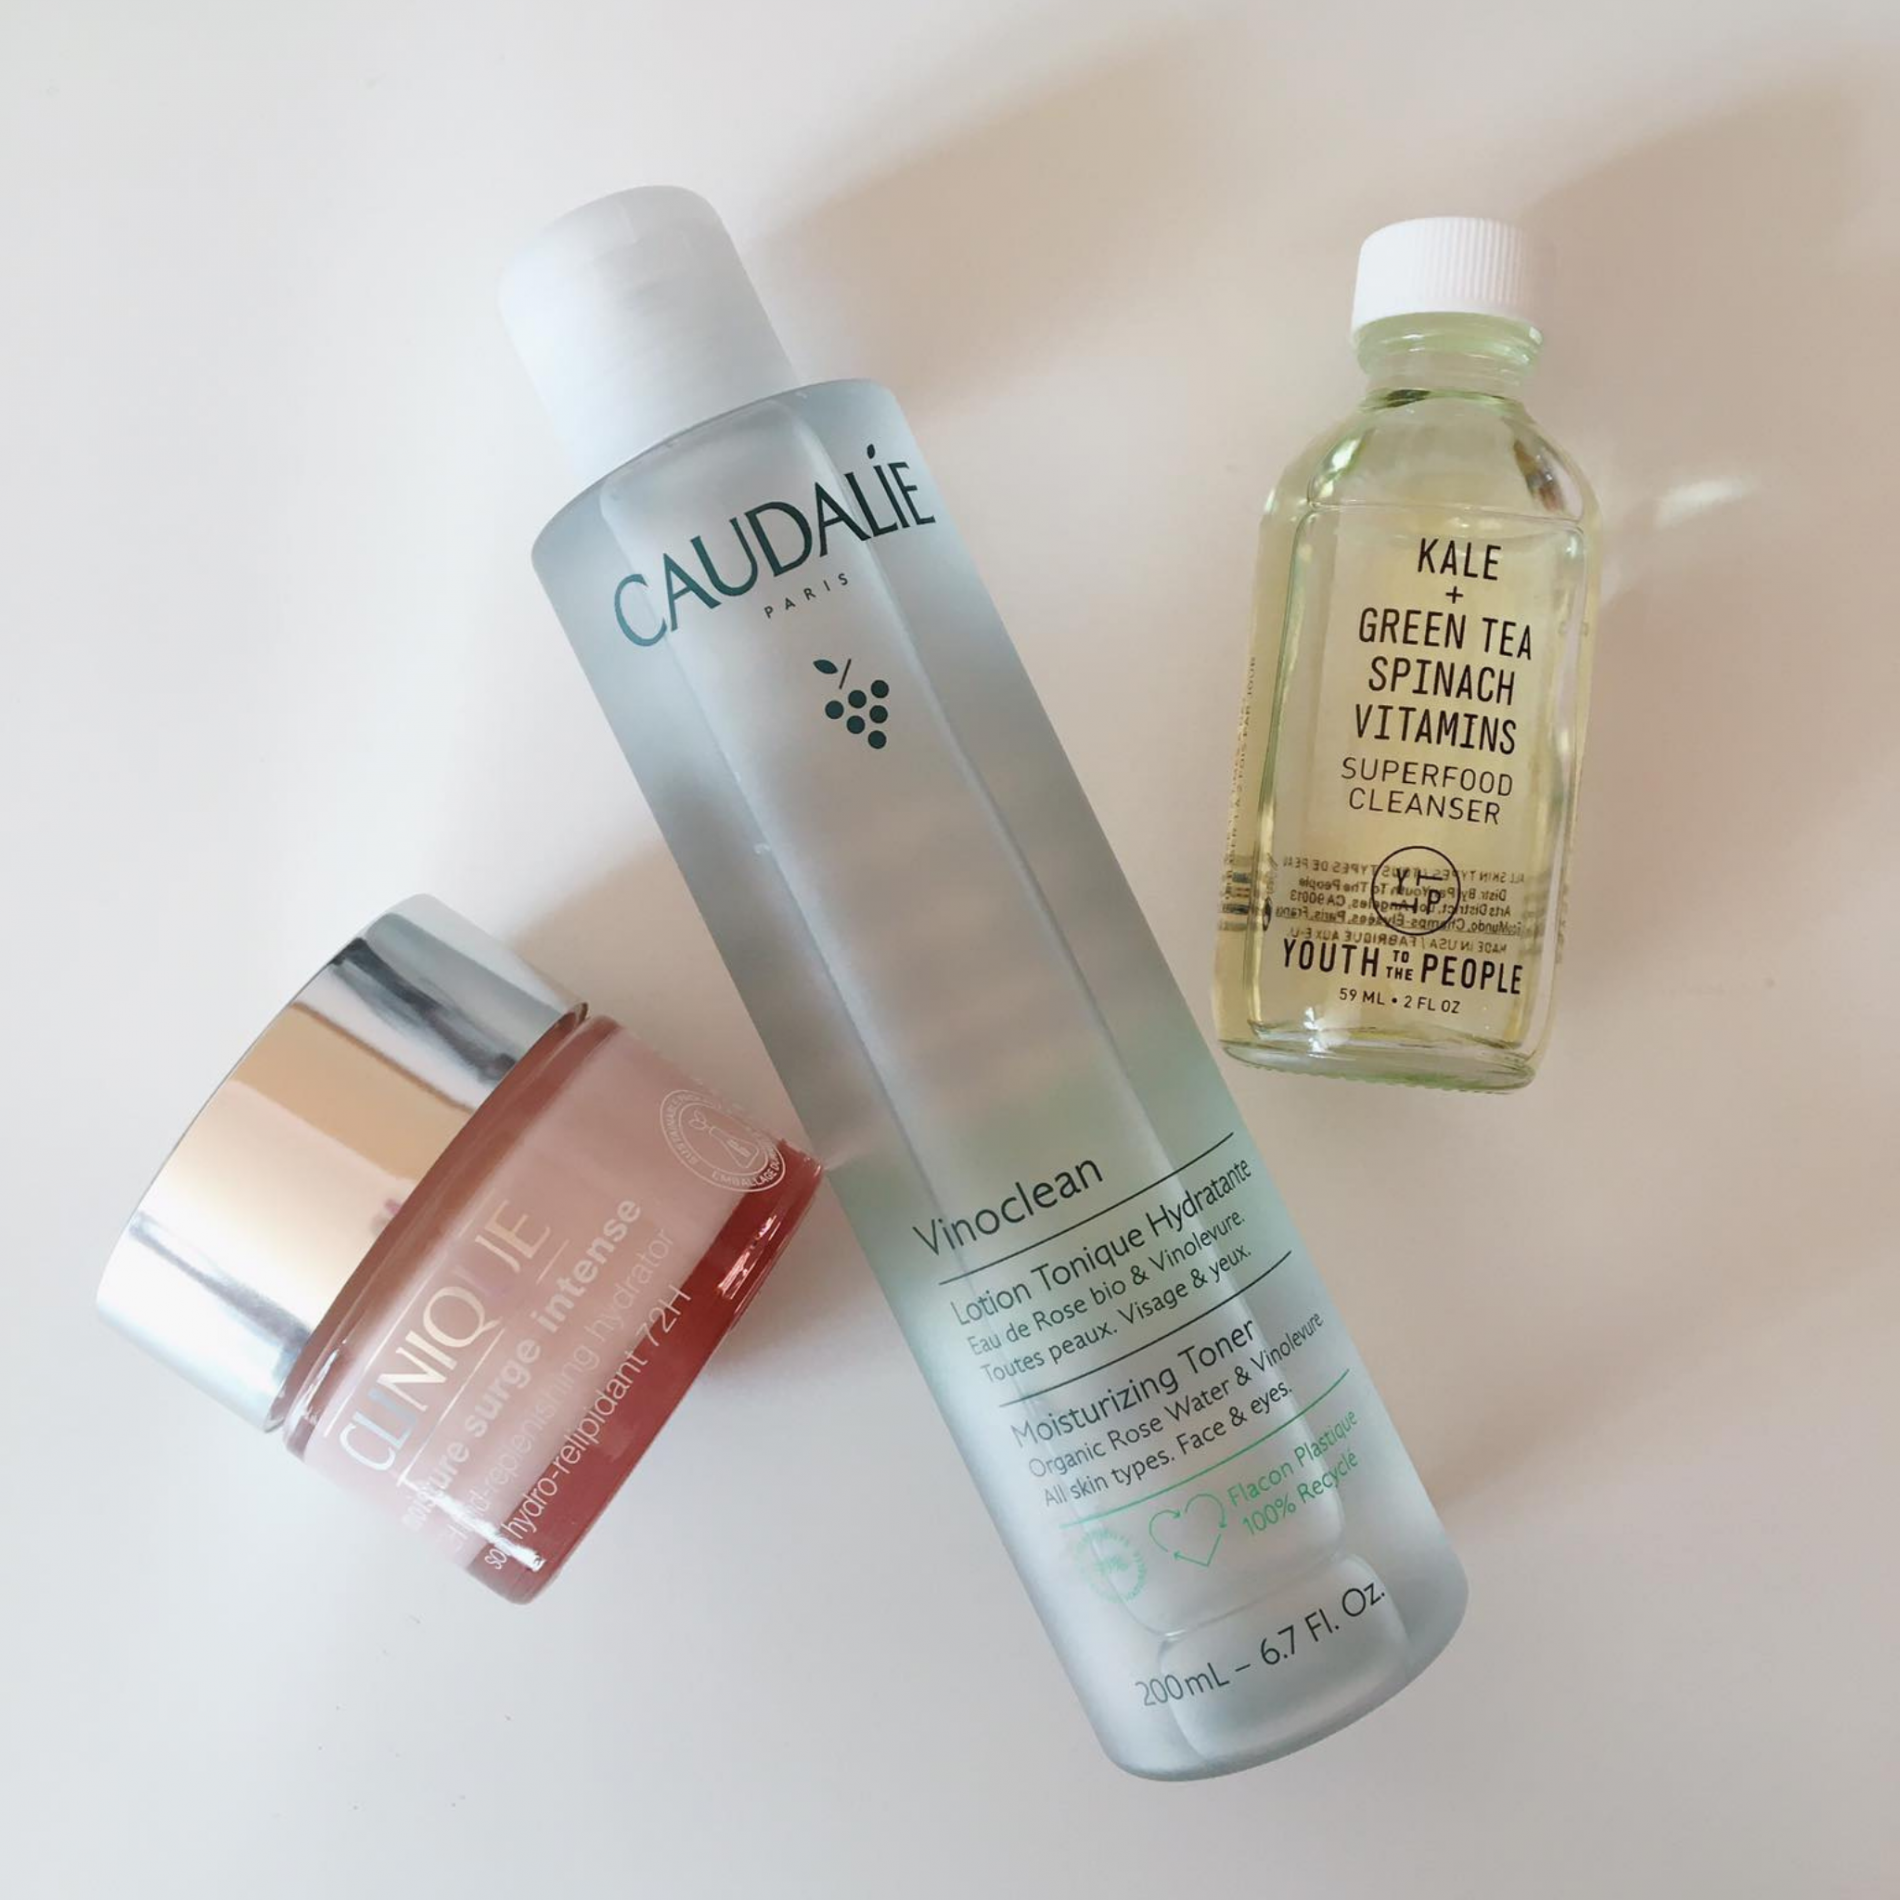 Blog Post Header - How to choose the right skincare products for your skin - Moisturizer - Cleanser - Toner